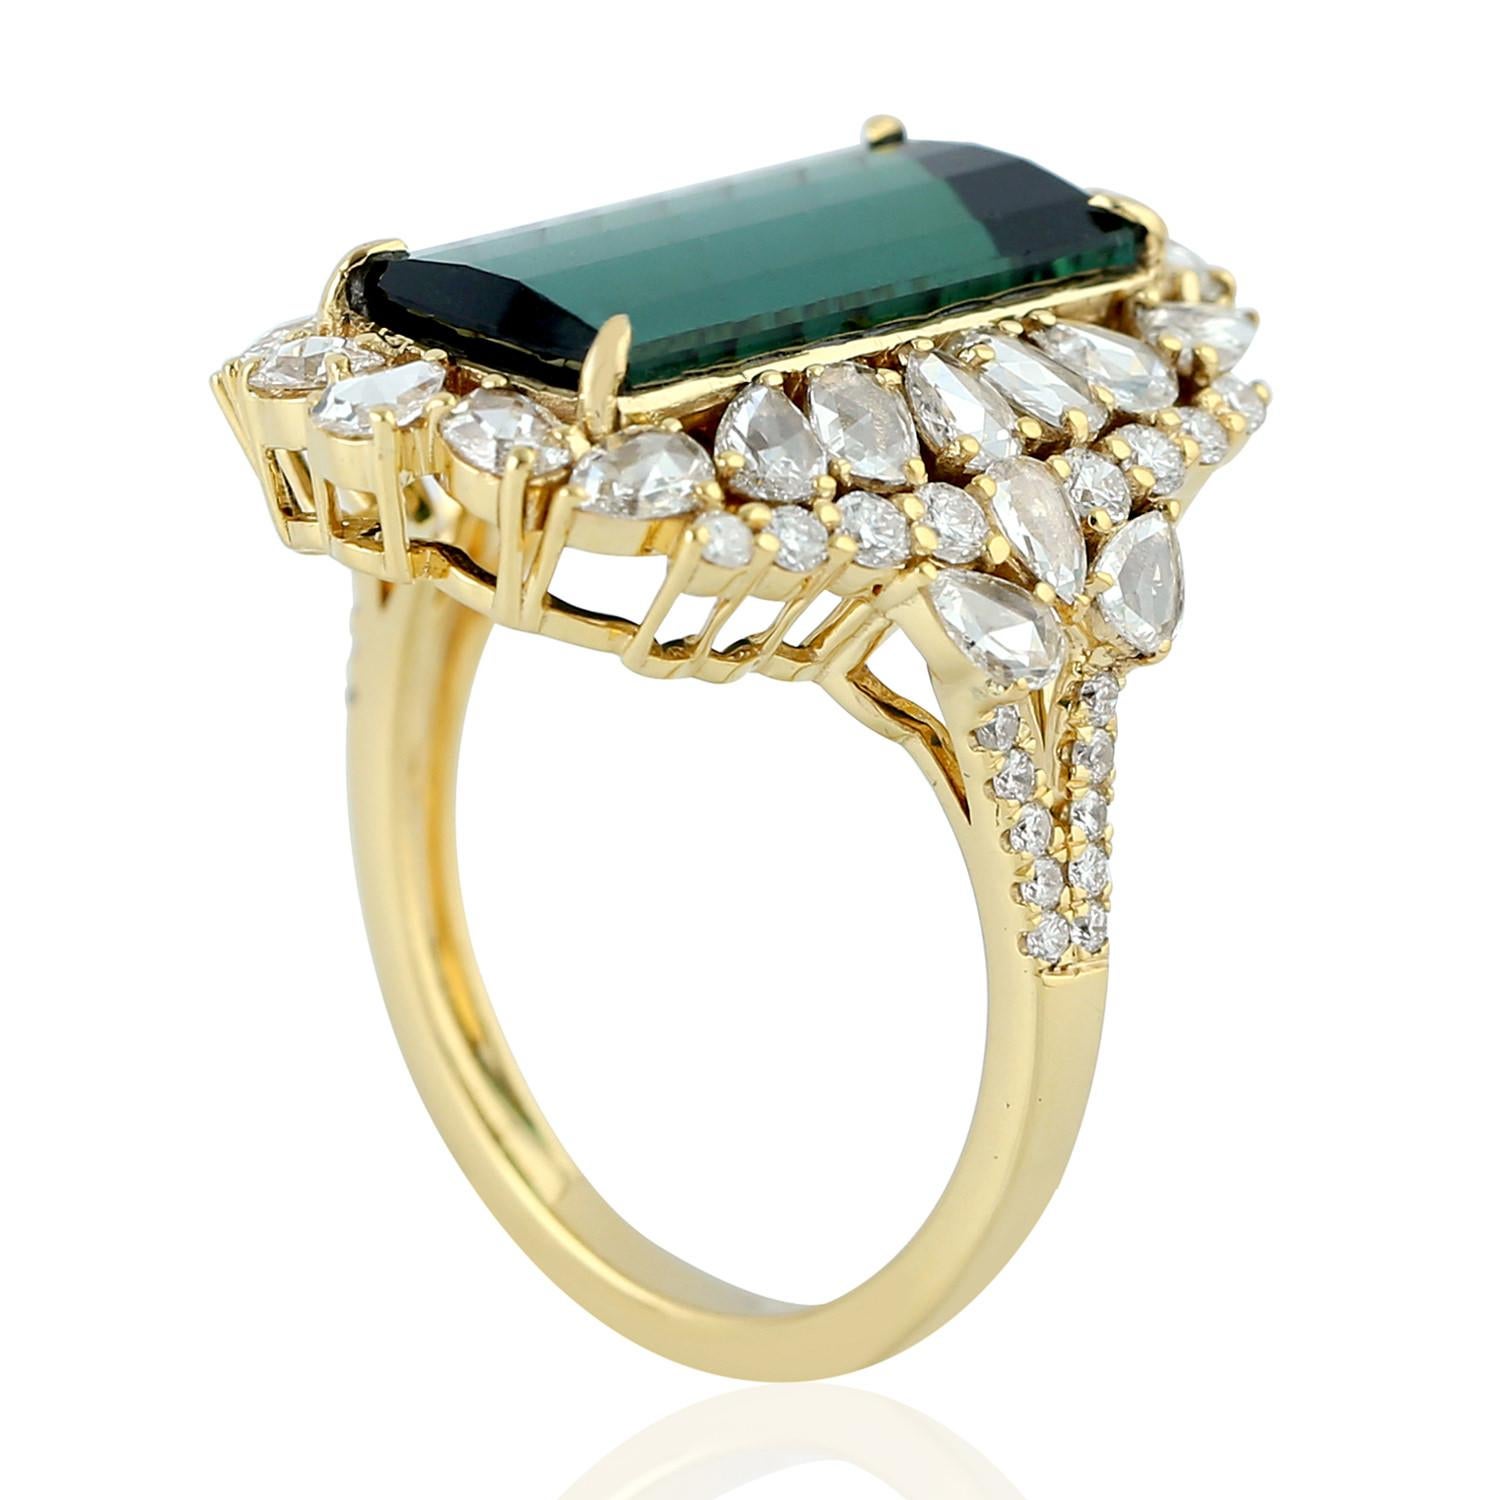 Gorgeous Green Tourmaline Ring with pear and round shape diamonds in 18K gold is perfect for wearing or gifting to your loved ones for this Holiday Season.

Ring Size : 7 (can be sized)

18KT: 5.801gms
Diamond: 1.52cts
Tourmaline: 5.82cts

